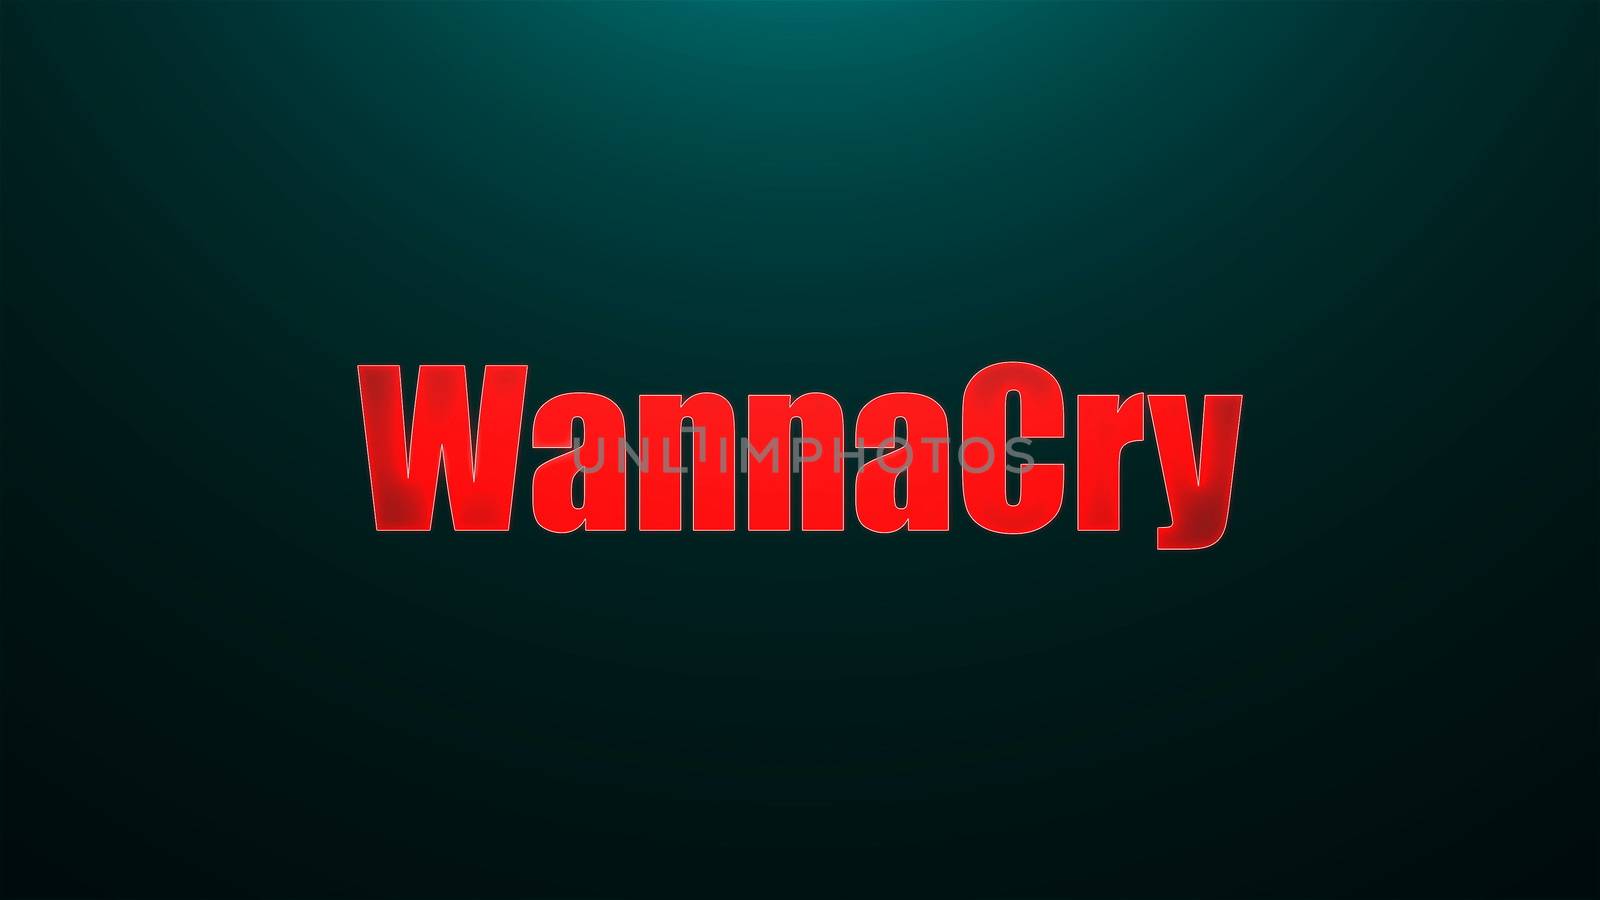 Letters of WannaCry text on background with top light, 3d rendering background, computer generating